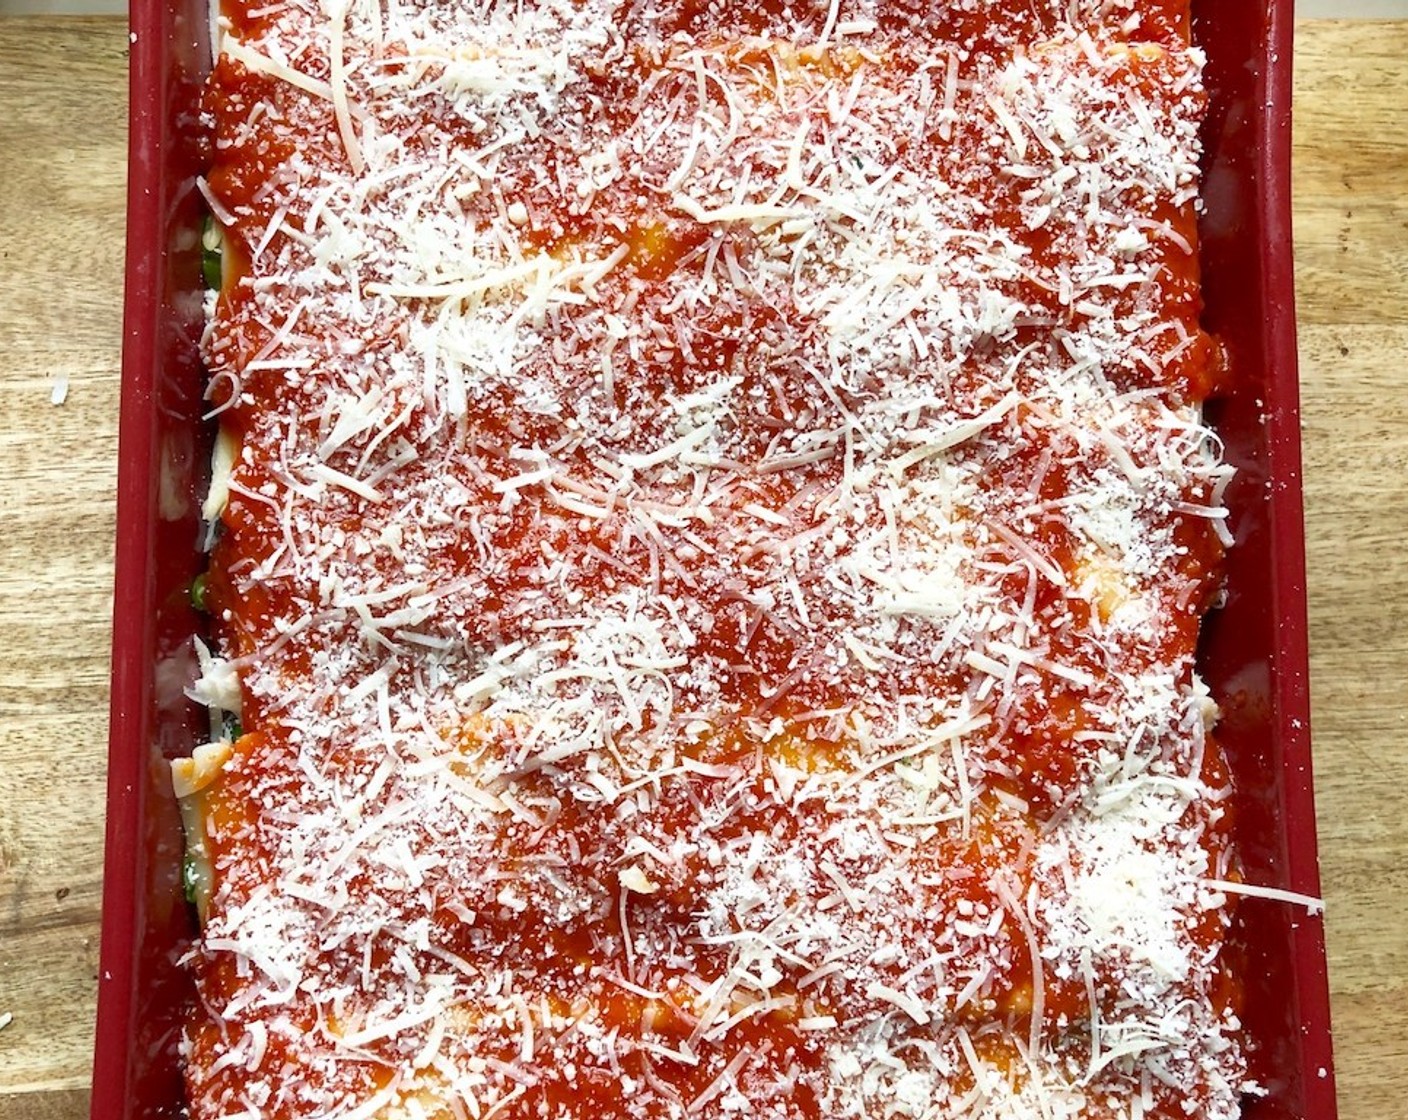 step 15 Repeat with another layer of noodles, vegetables, cheeses, and sauce, followed by a finishing layer of noodles. Top them off with the remaining sauce and parmesan cheese.